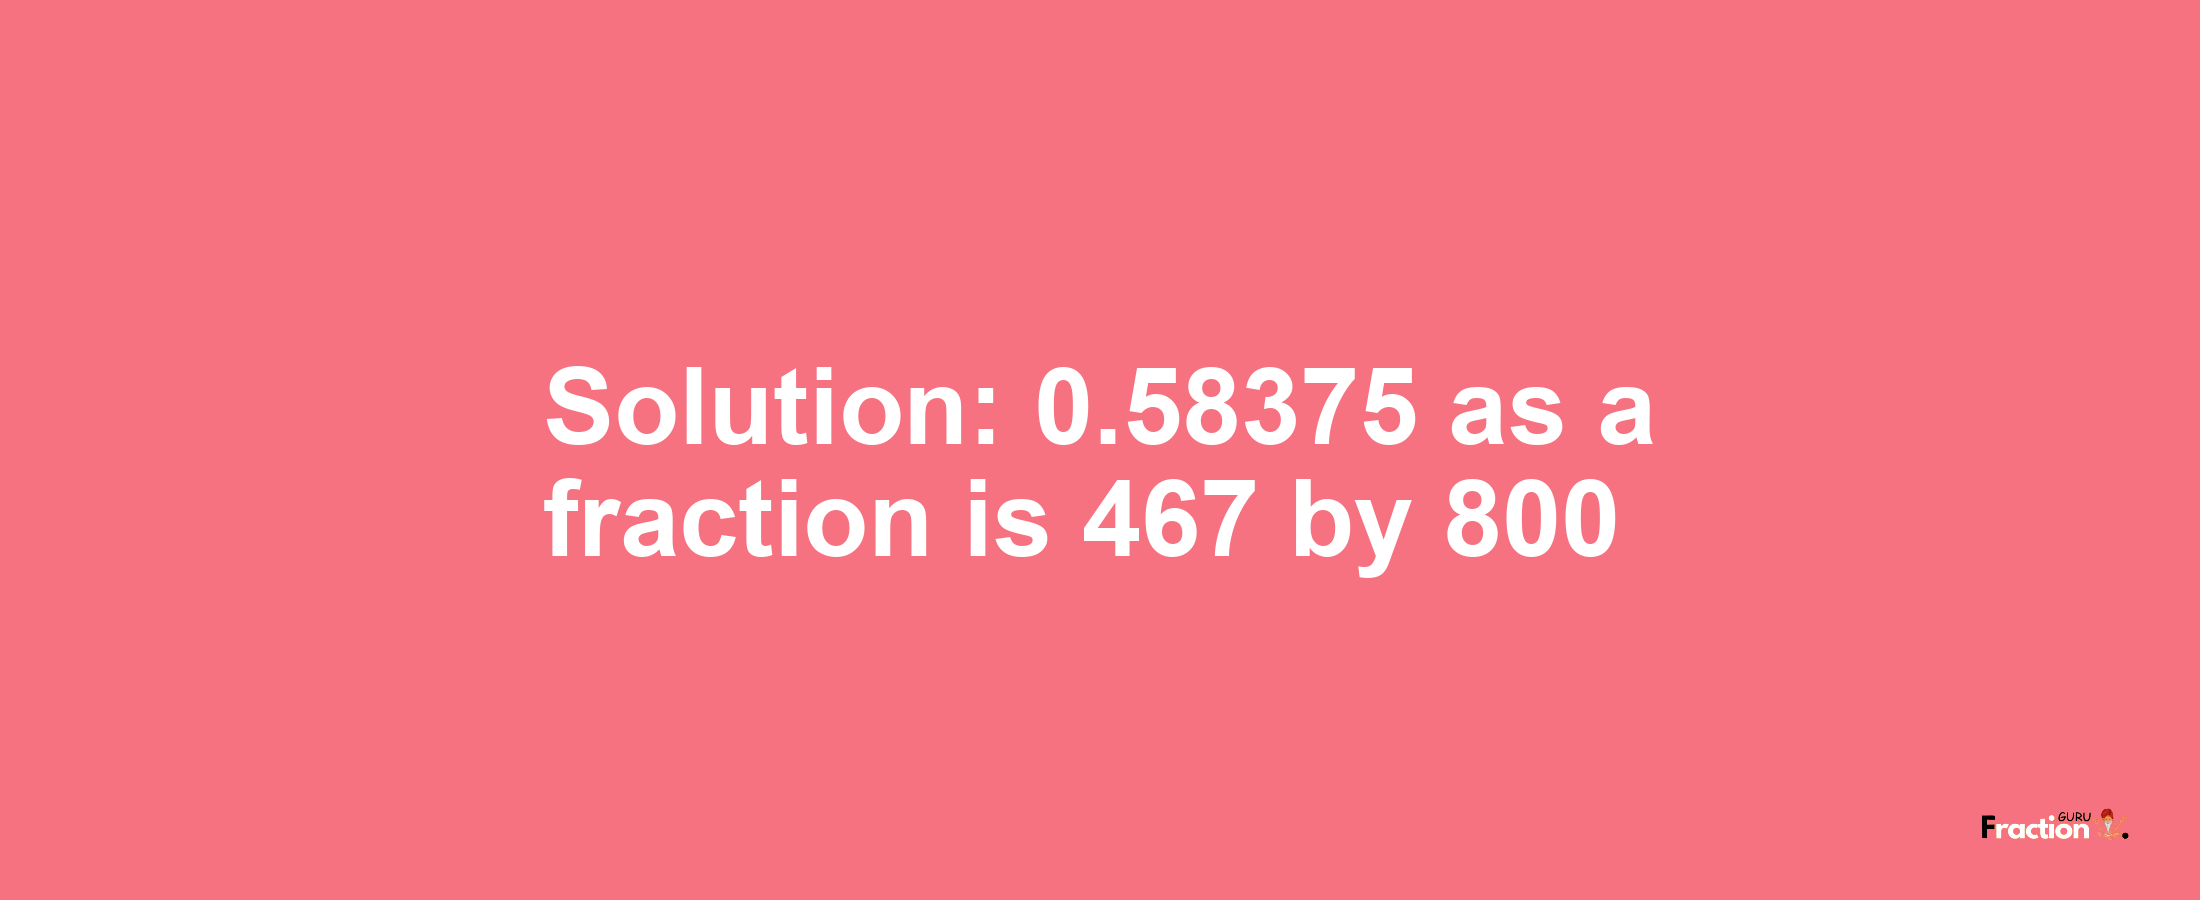 Solution:0.58375 as a fraction is 467/800